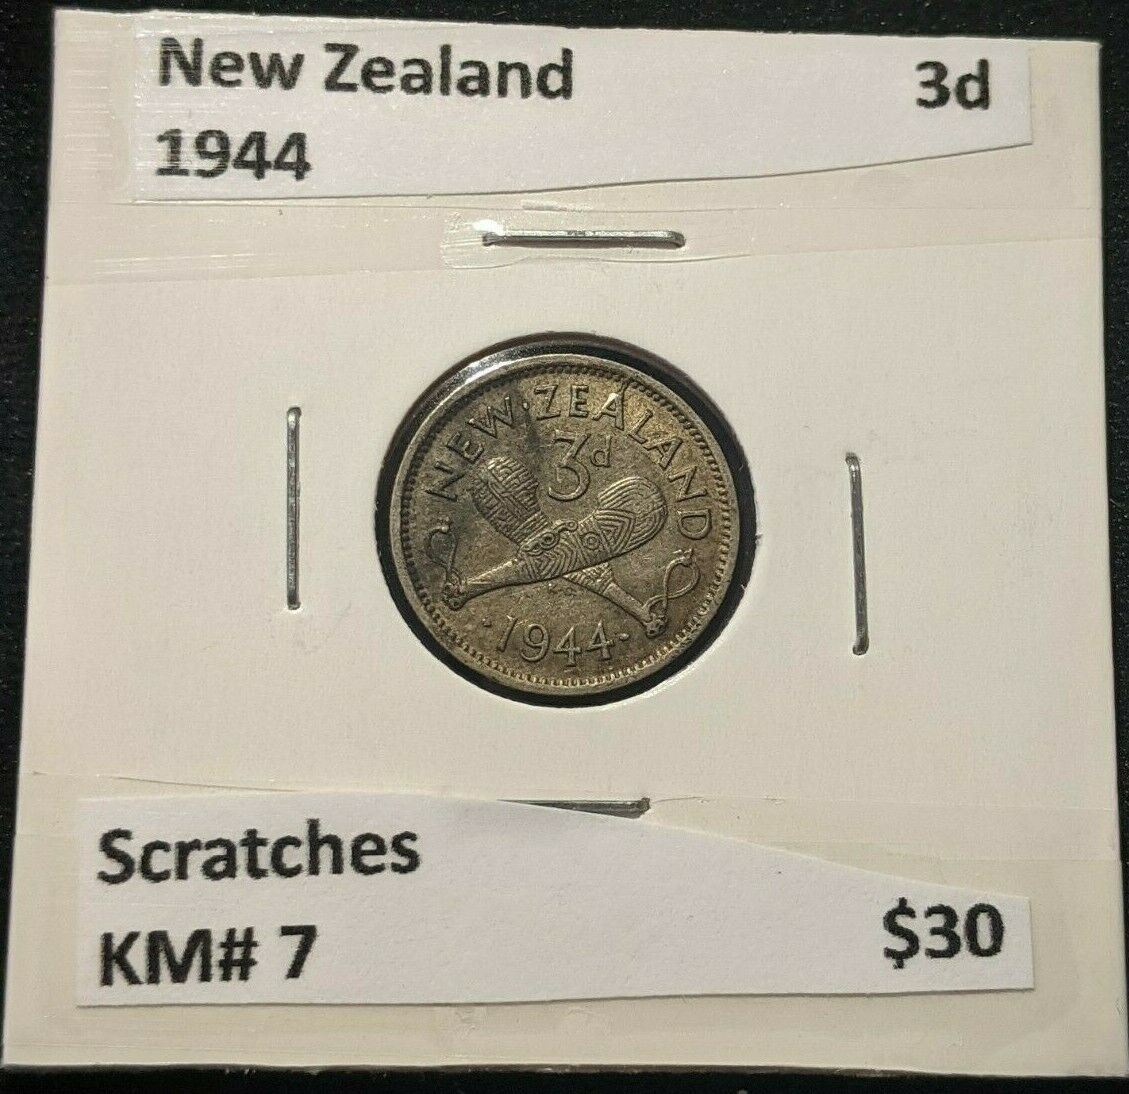 New Zealand 1944 3d Threepence KM# 7 Scratches #062